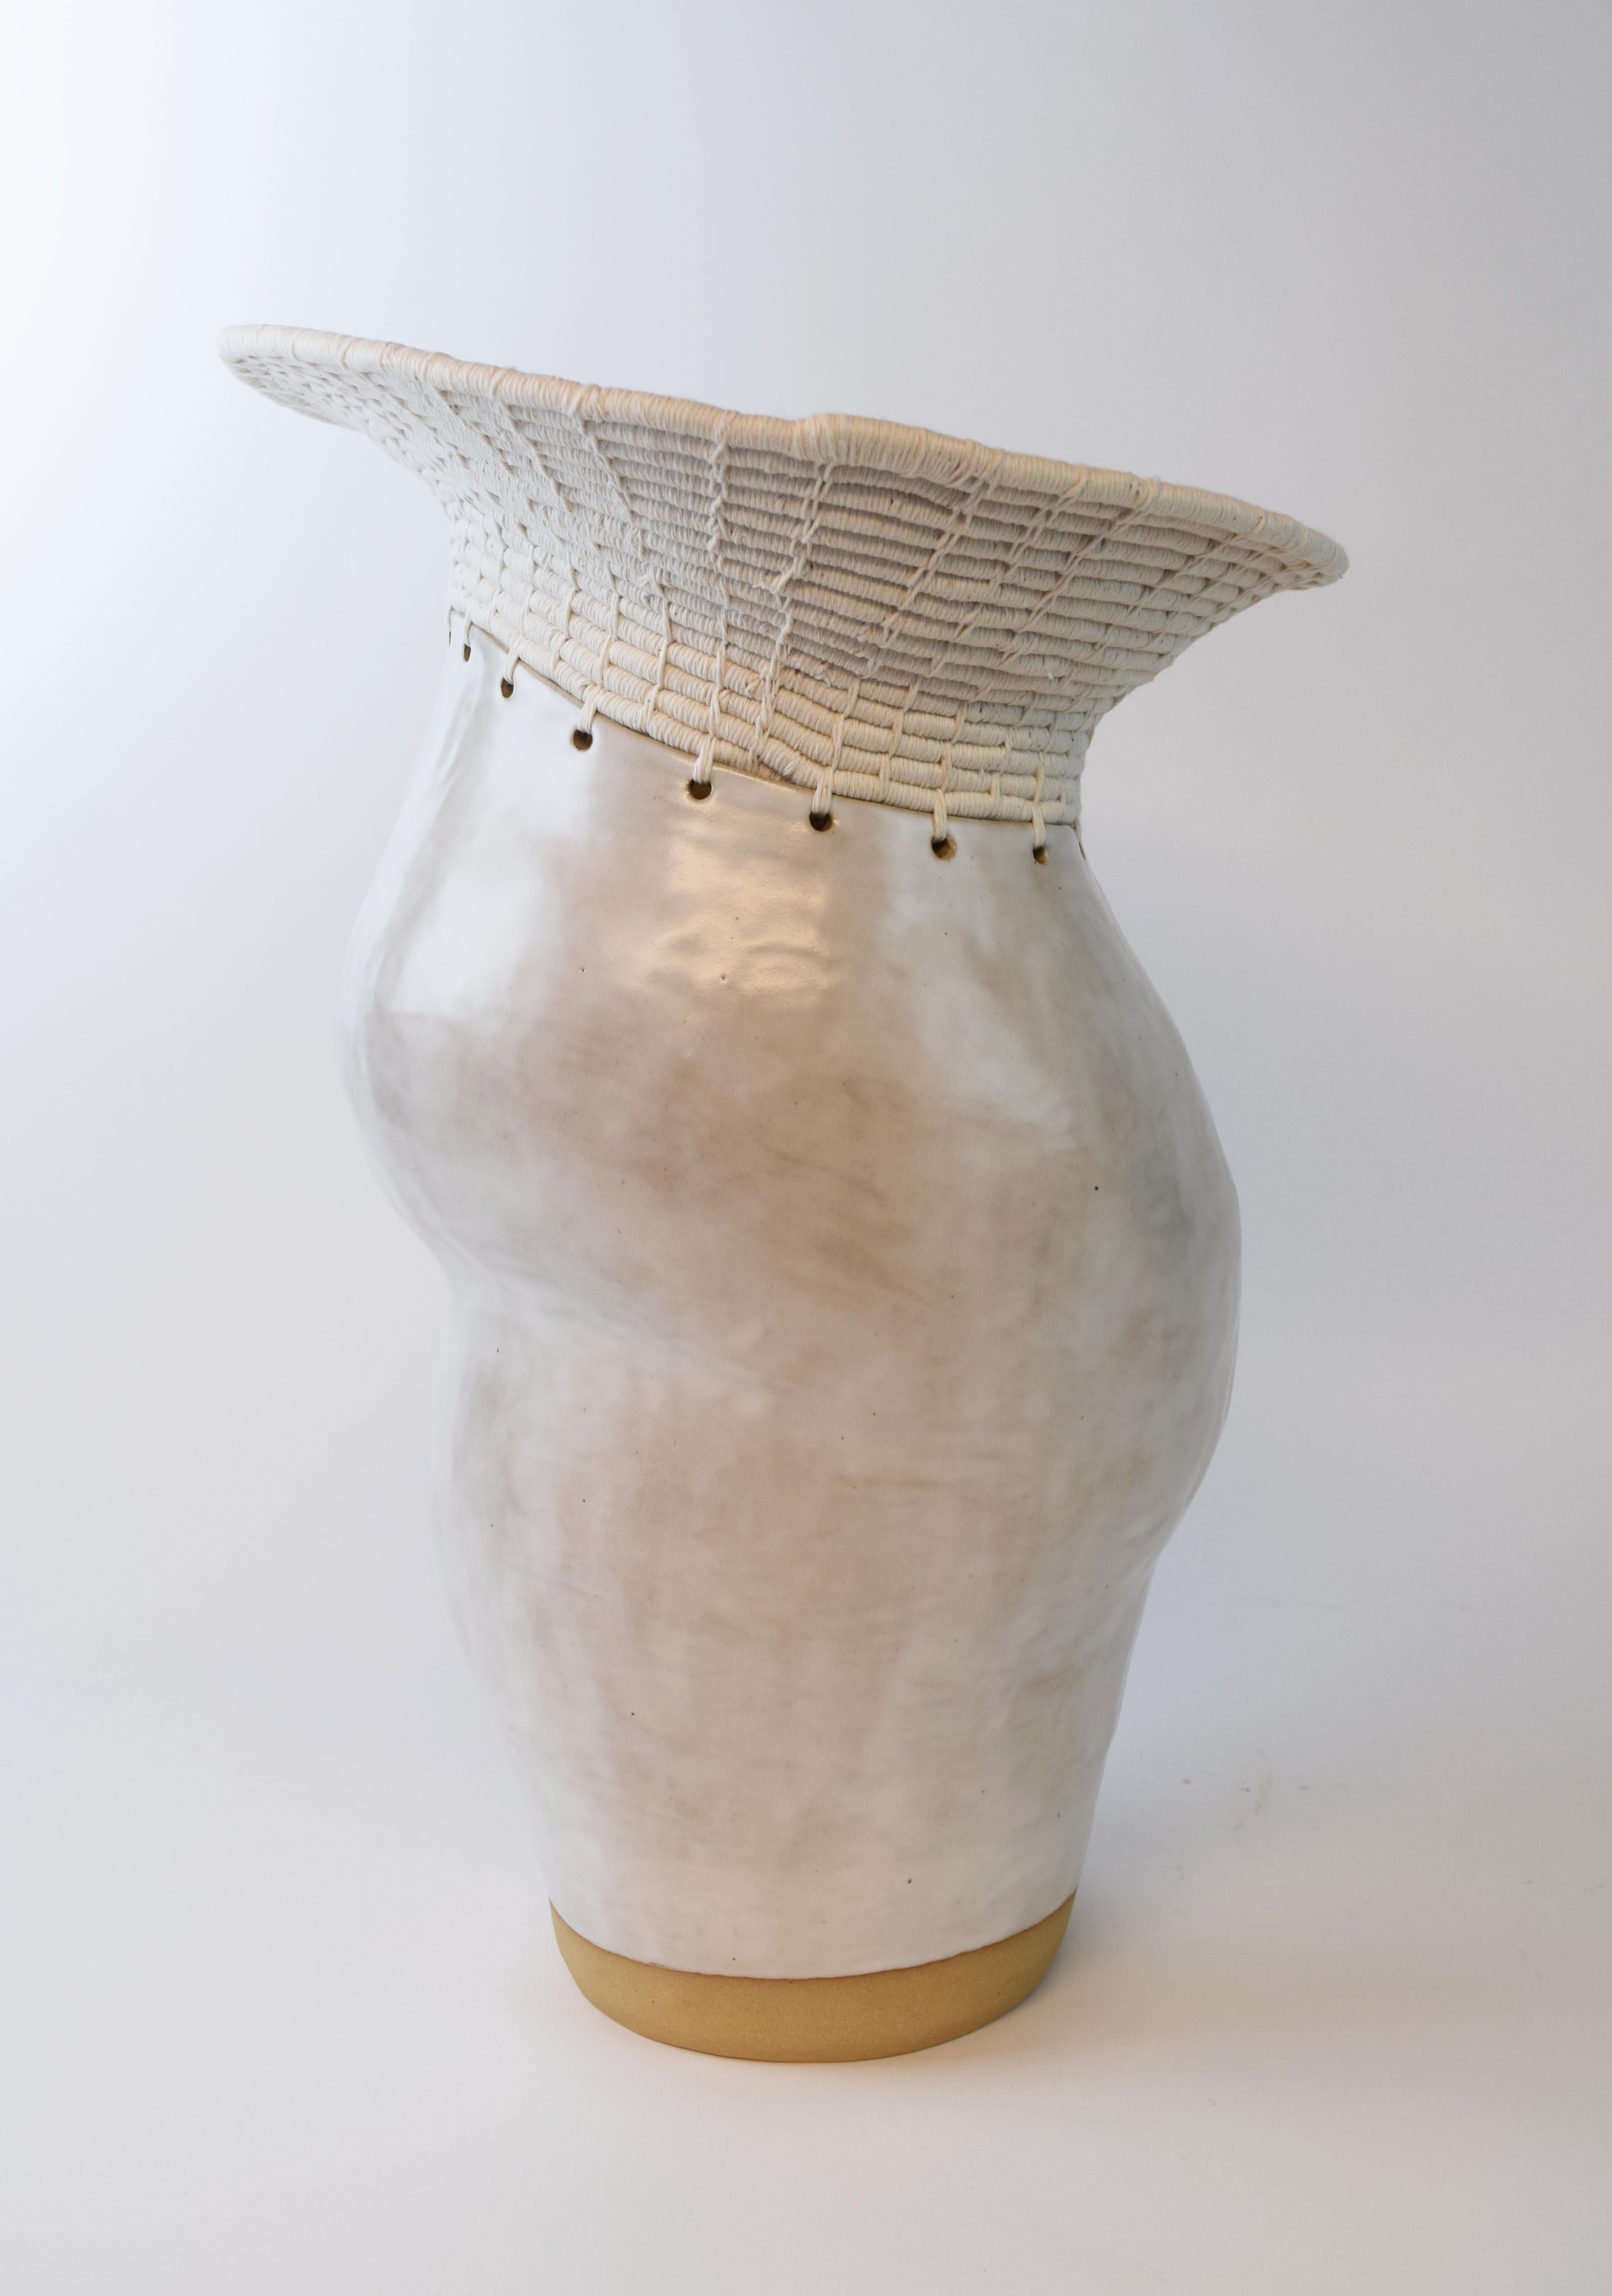 Hand formed asymmetrical stoneware vessel with satin white glaze. The top part of the vessel is woven in white cotton, showcasing the interplay of ceramic and fiber. 

Measures: 18.5”H x 13.5”W

One of a kind collections with a limited number of